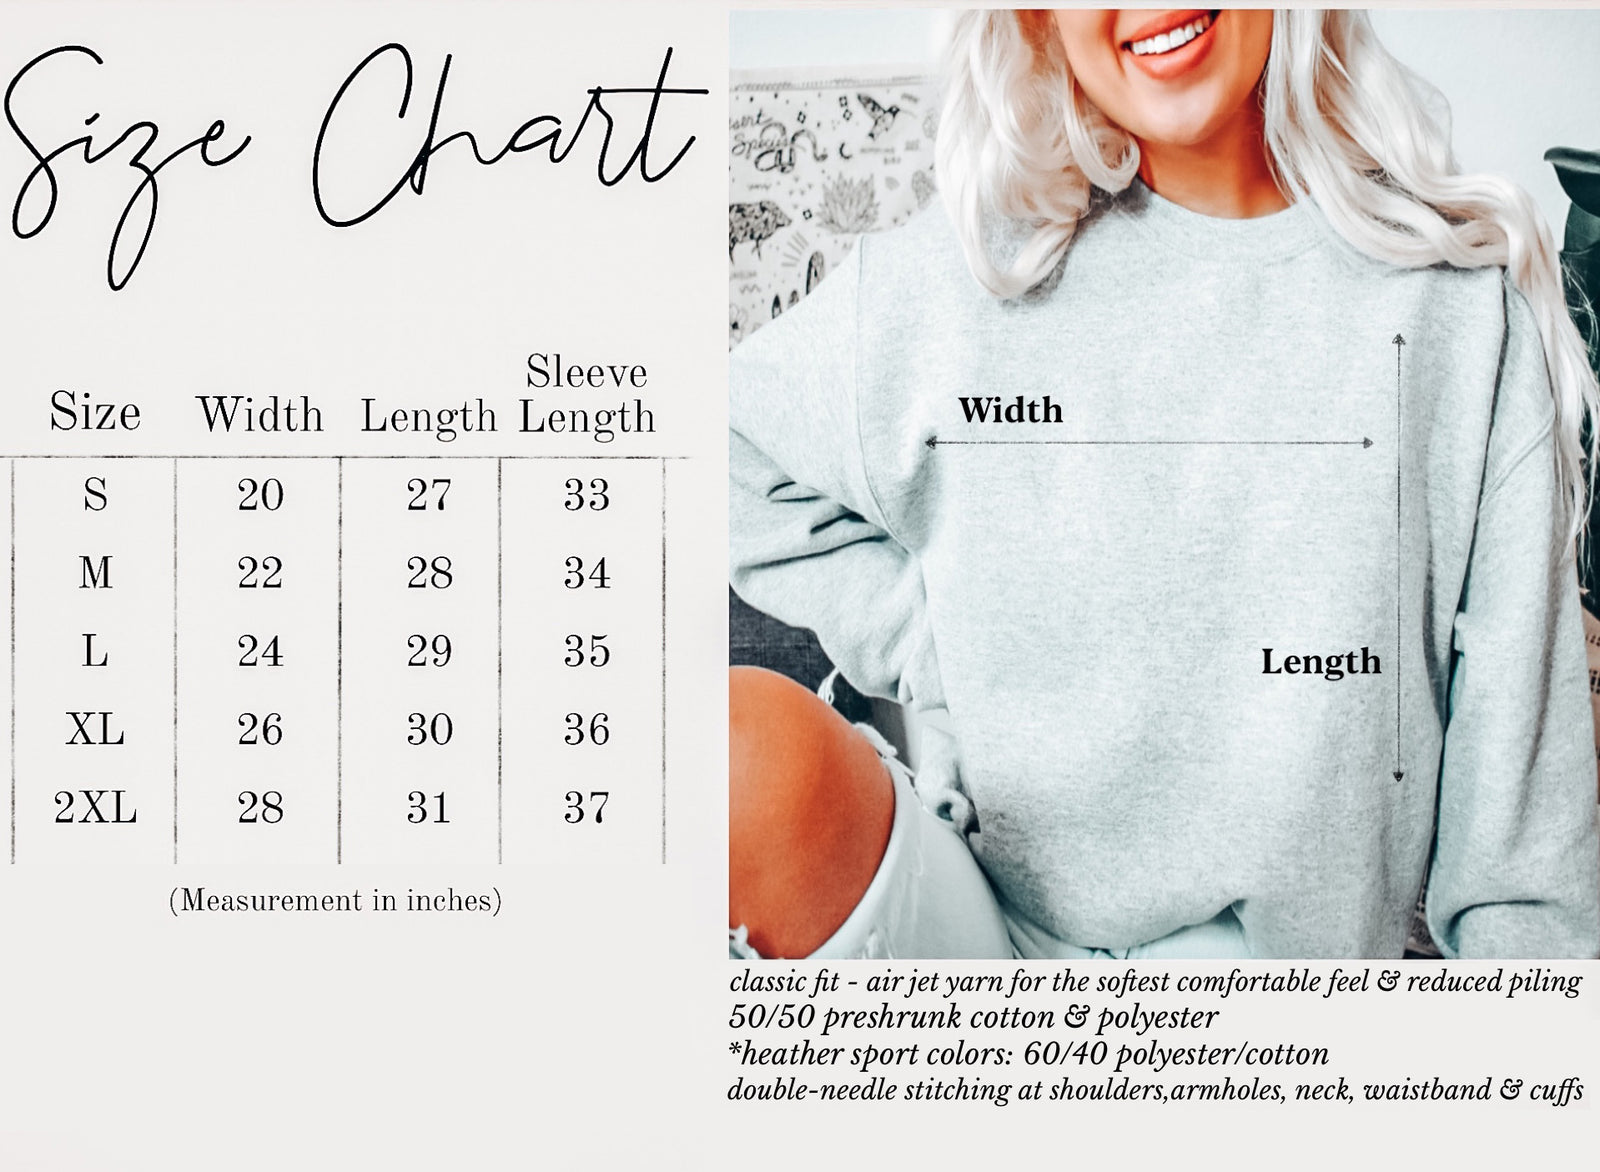 Sizing Charts - Limeberry Designs